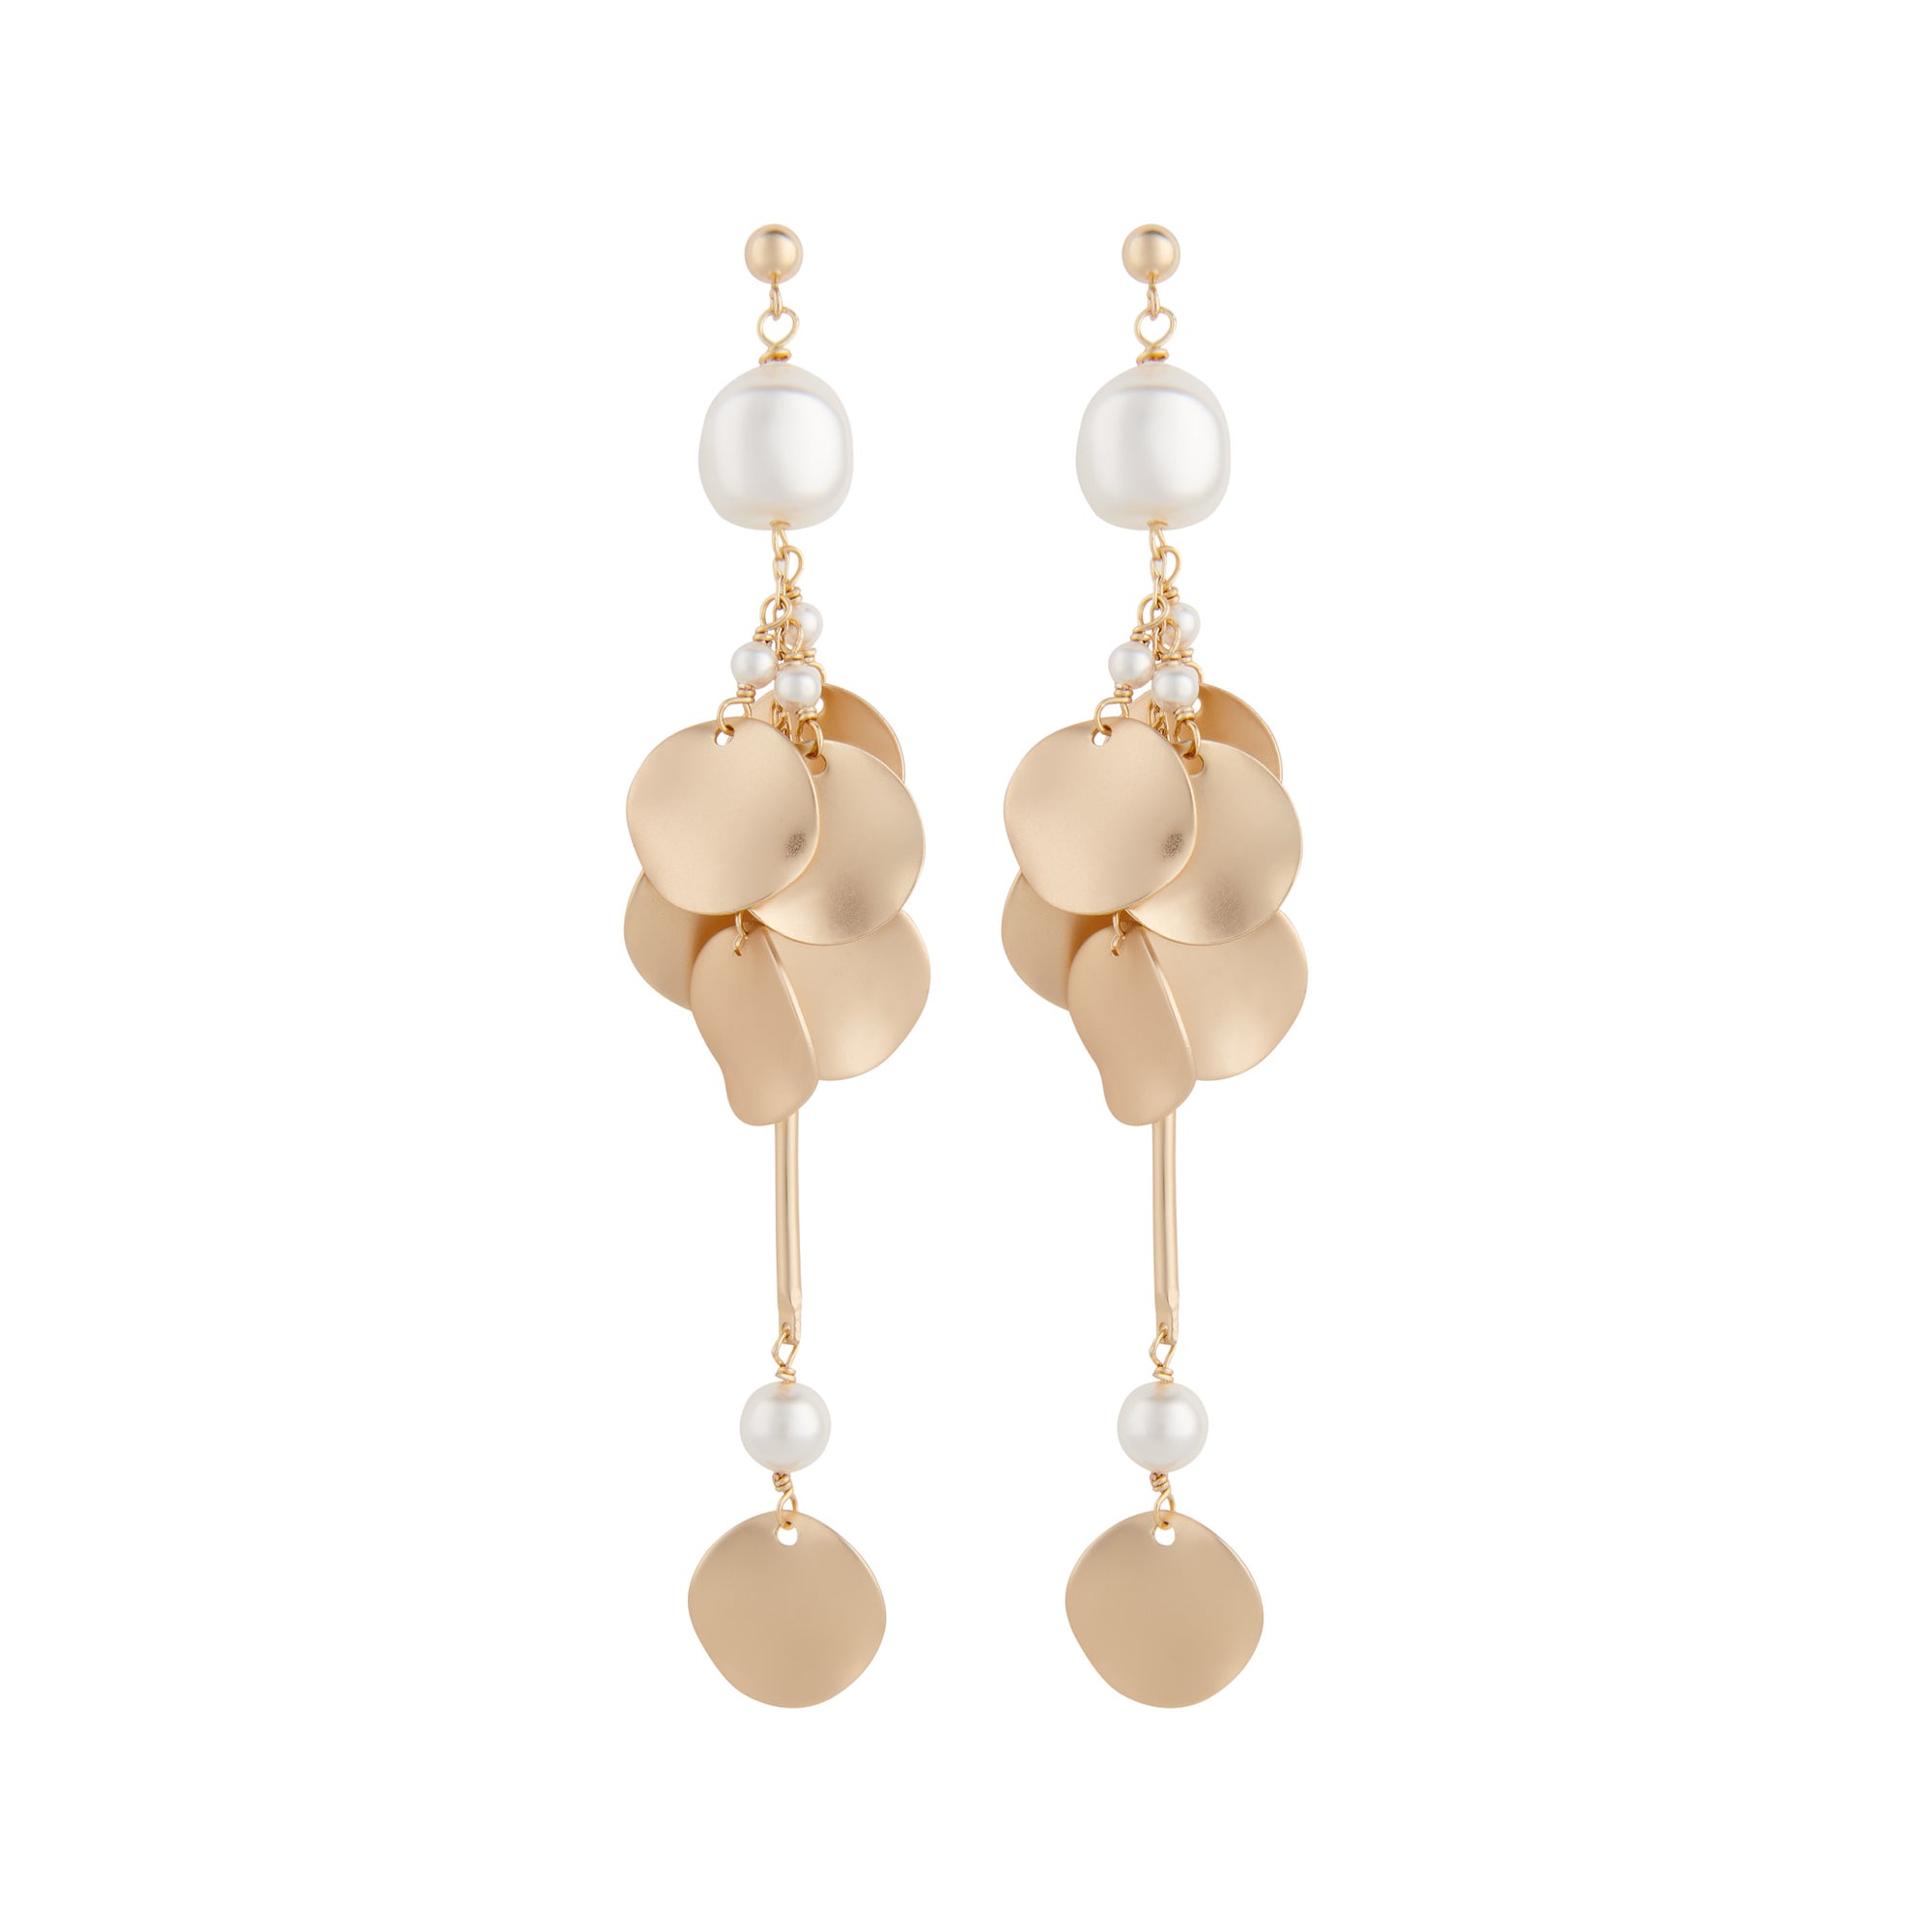 Matte gold ripple disc statement earrings with white pearls by vivien walsh